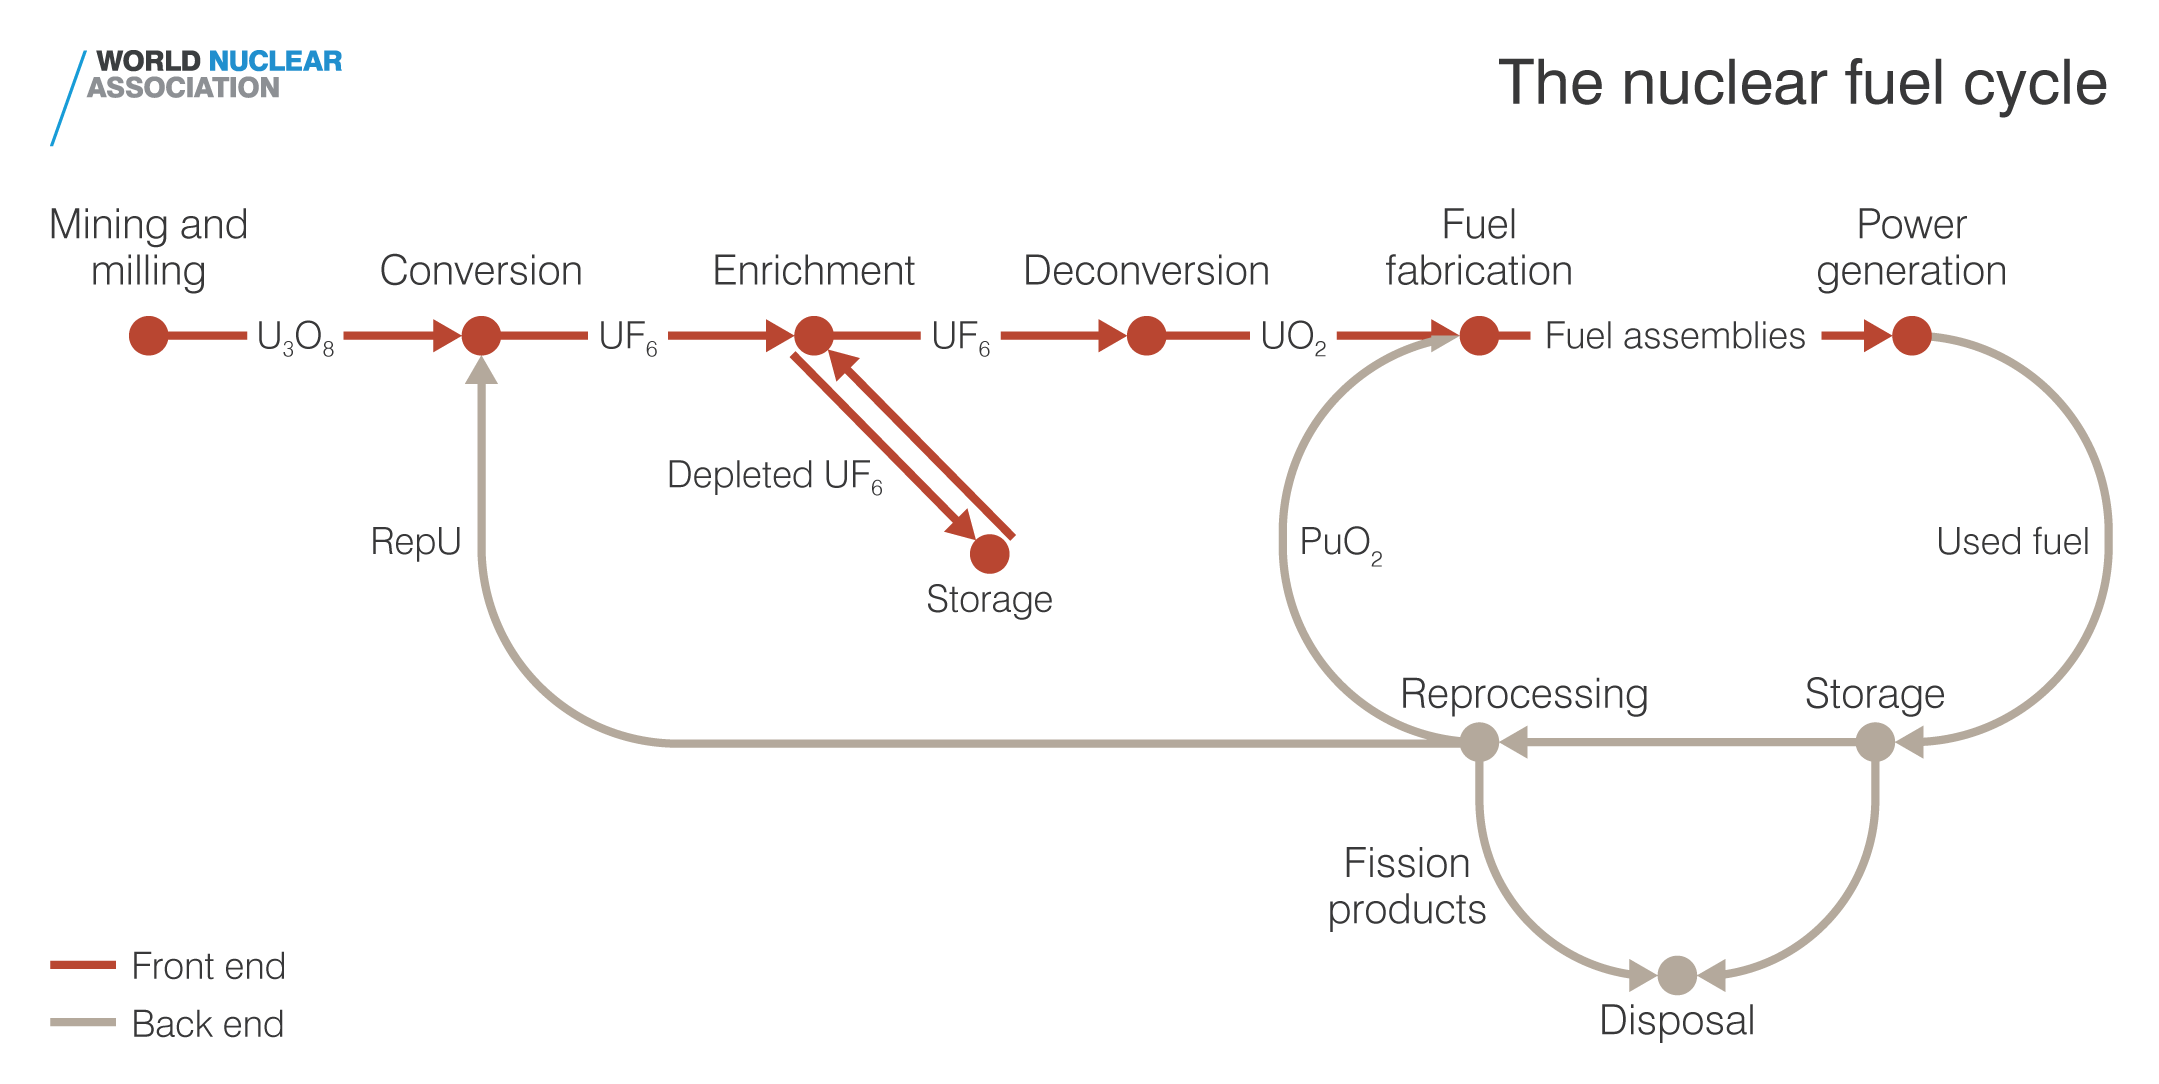 The nuclear fuel cycle